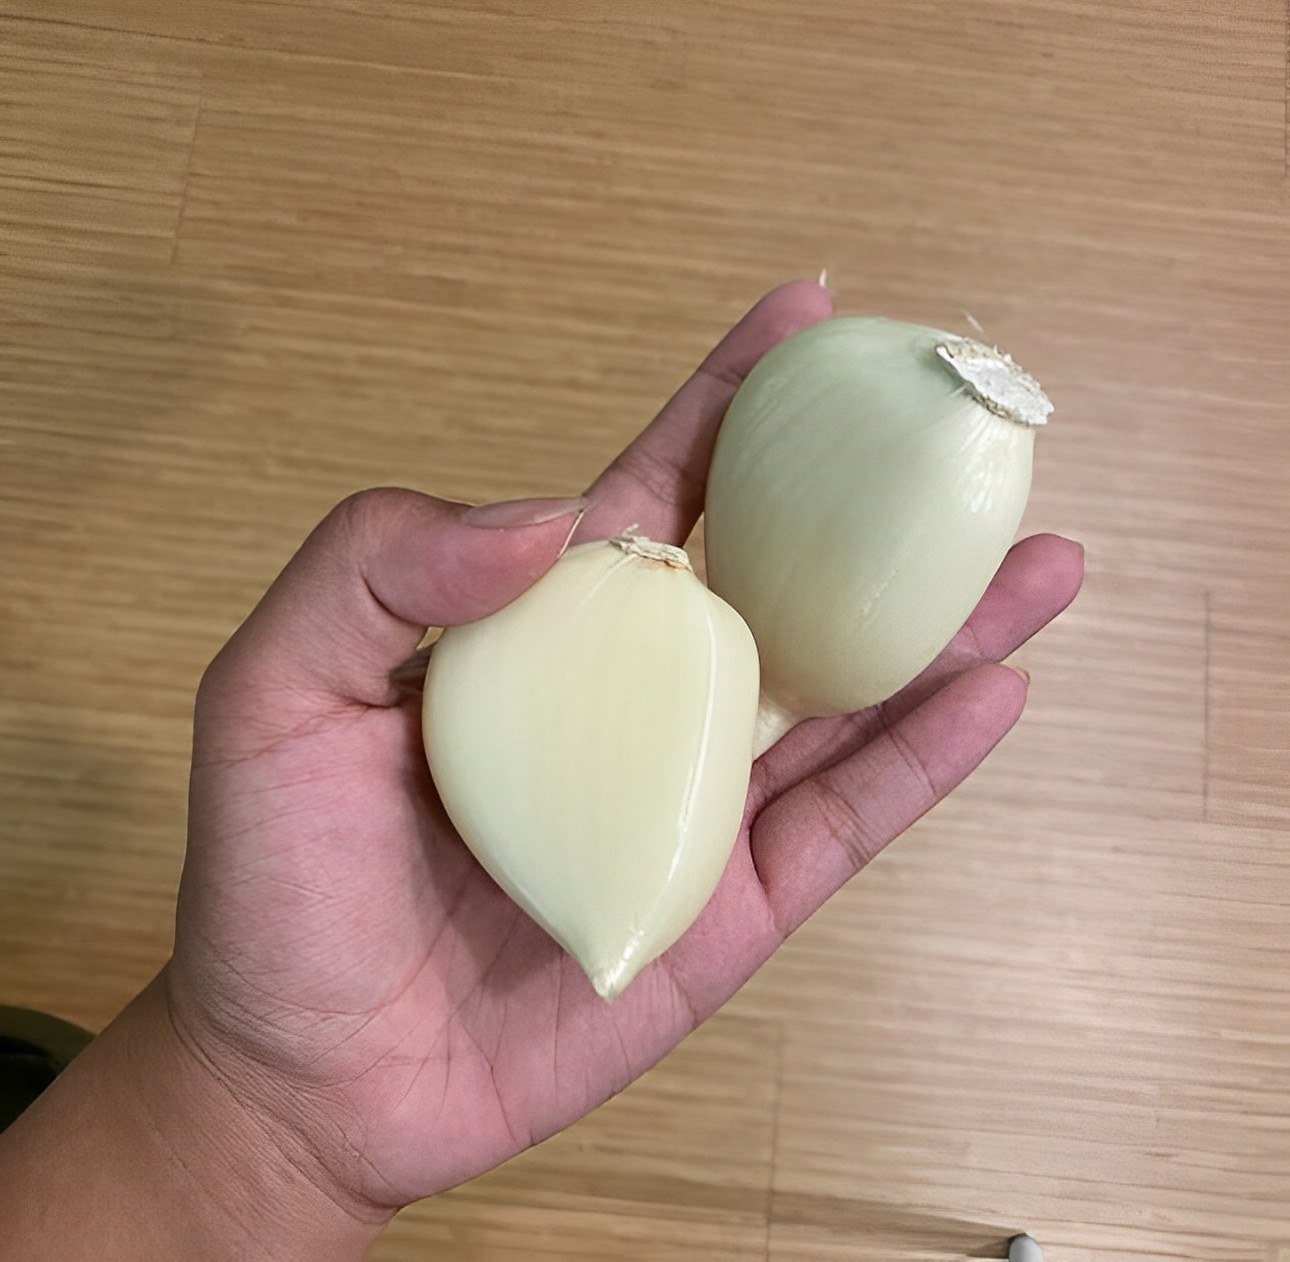 Two giant cloves of garlic each about the size of a palm of a hand